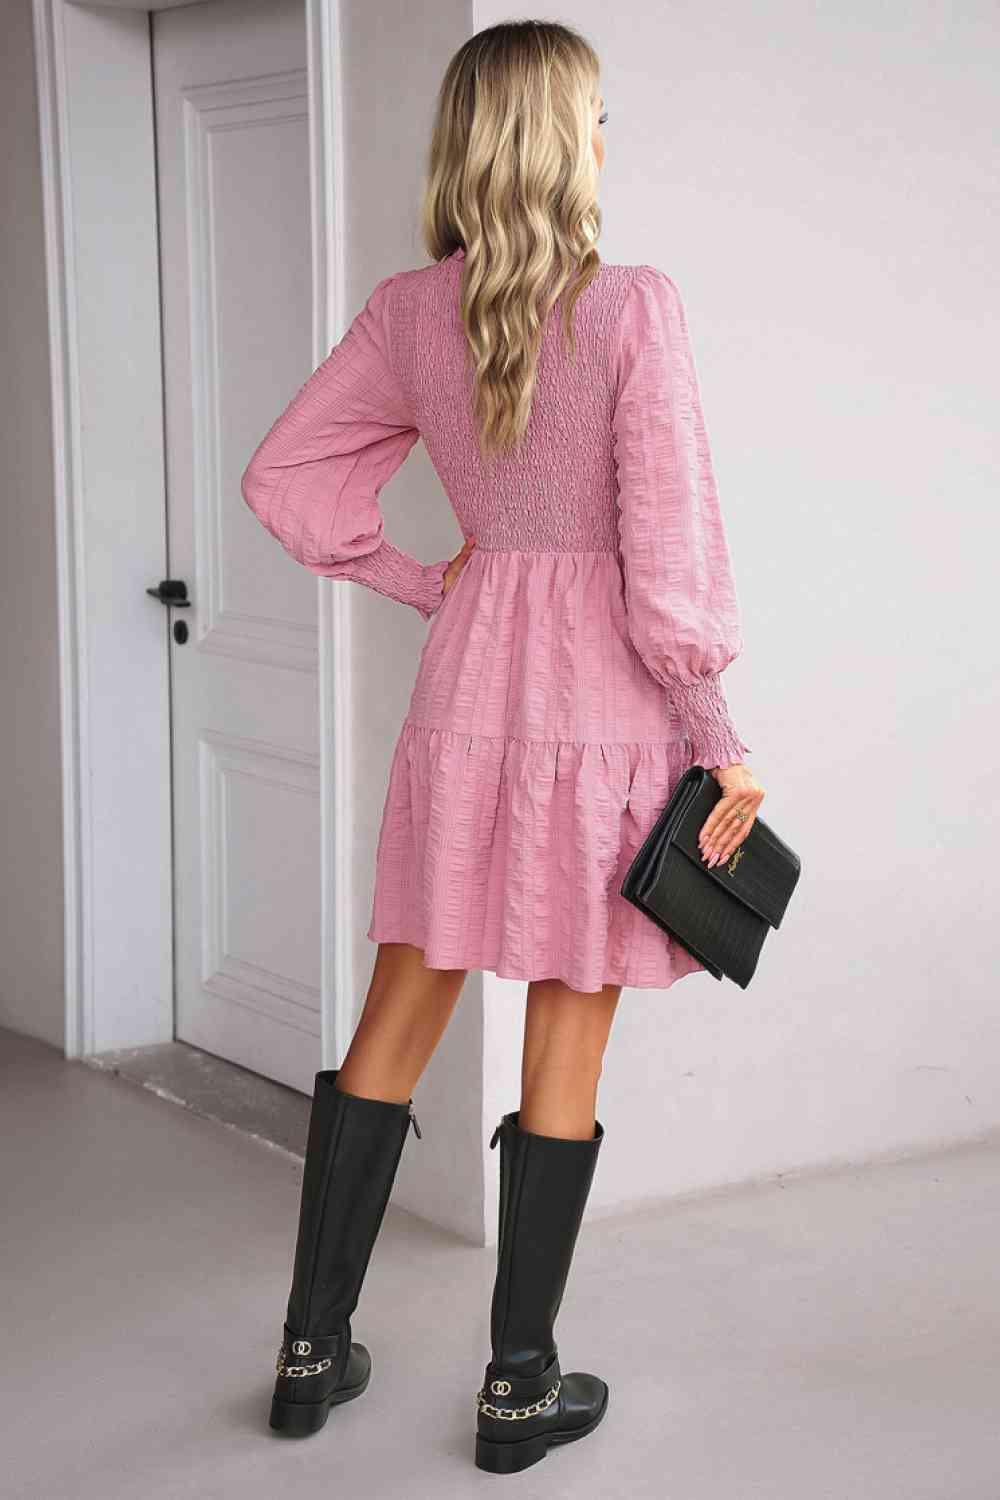 a woman wearing a pink dress and black boots